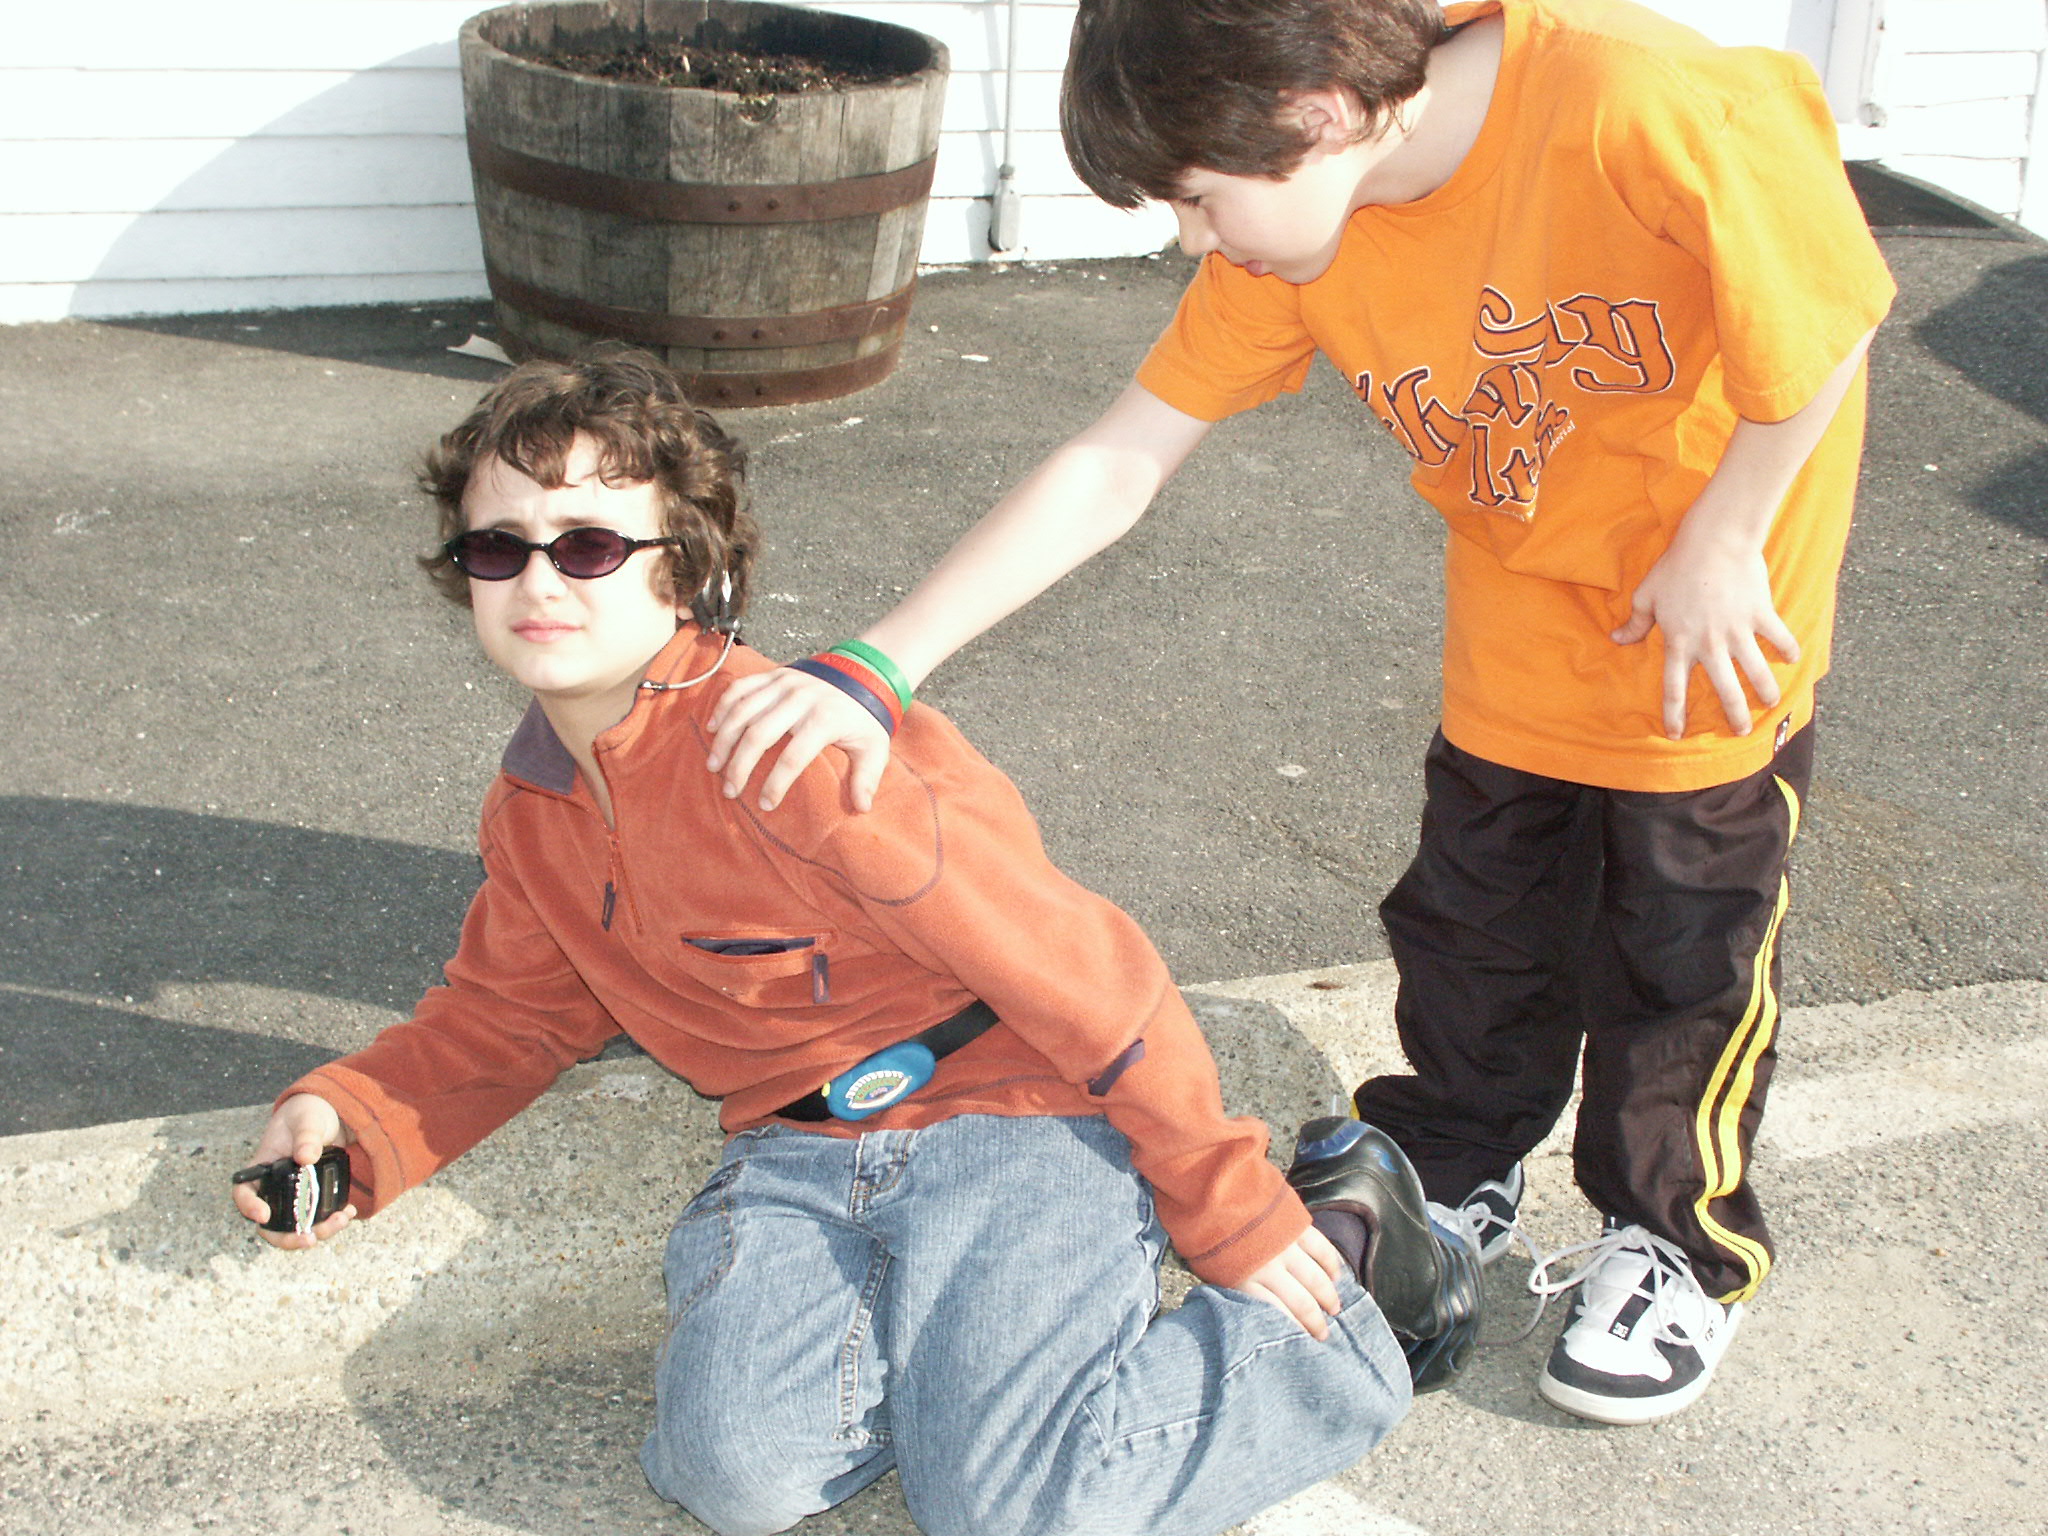 Photo of boy with hurt ankle and another boy helping him.